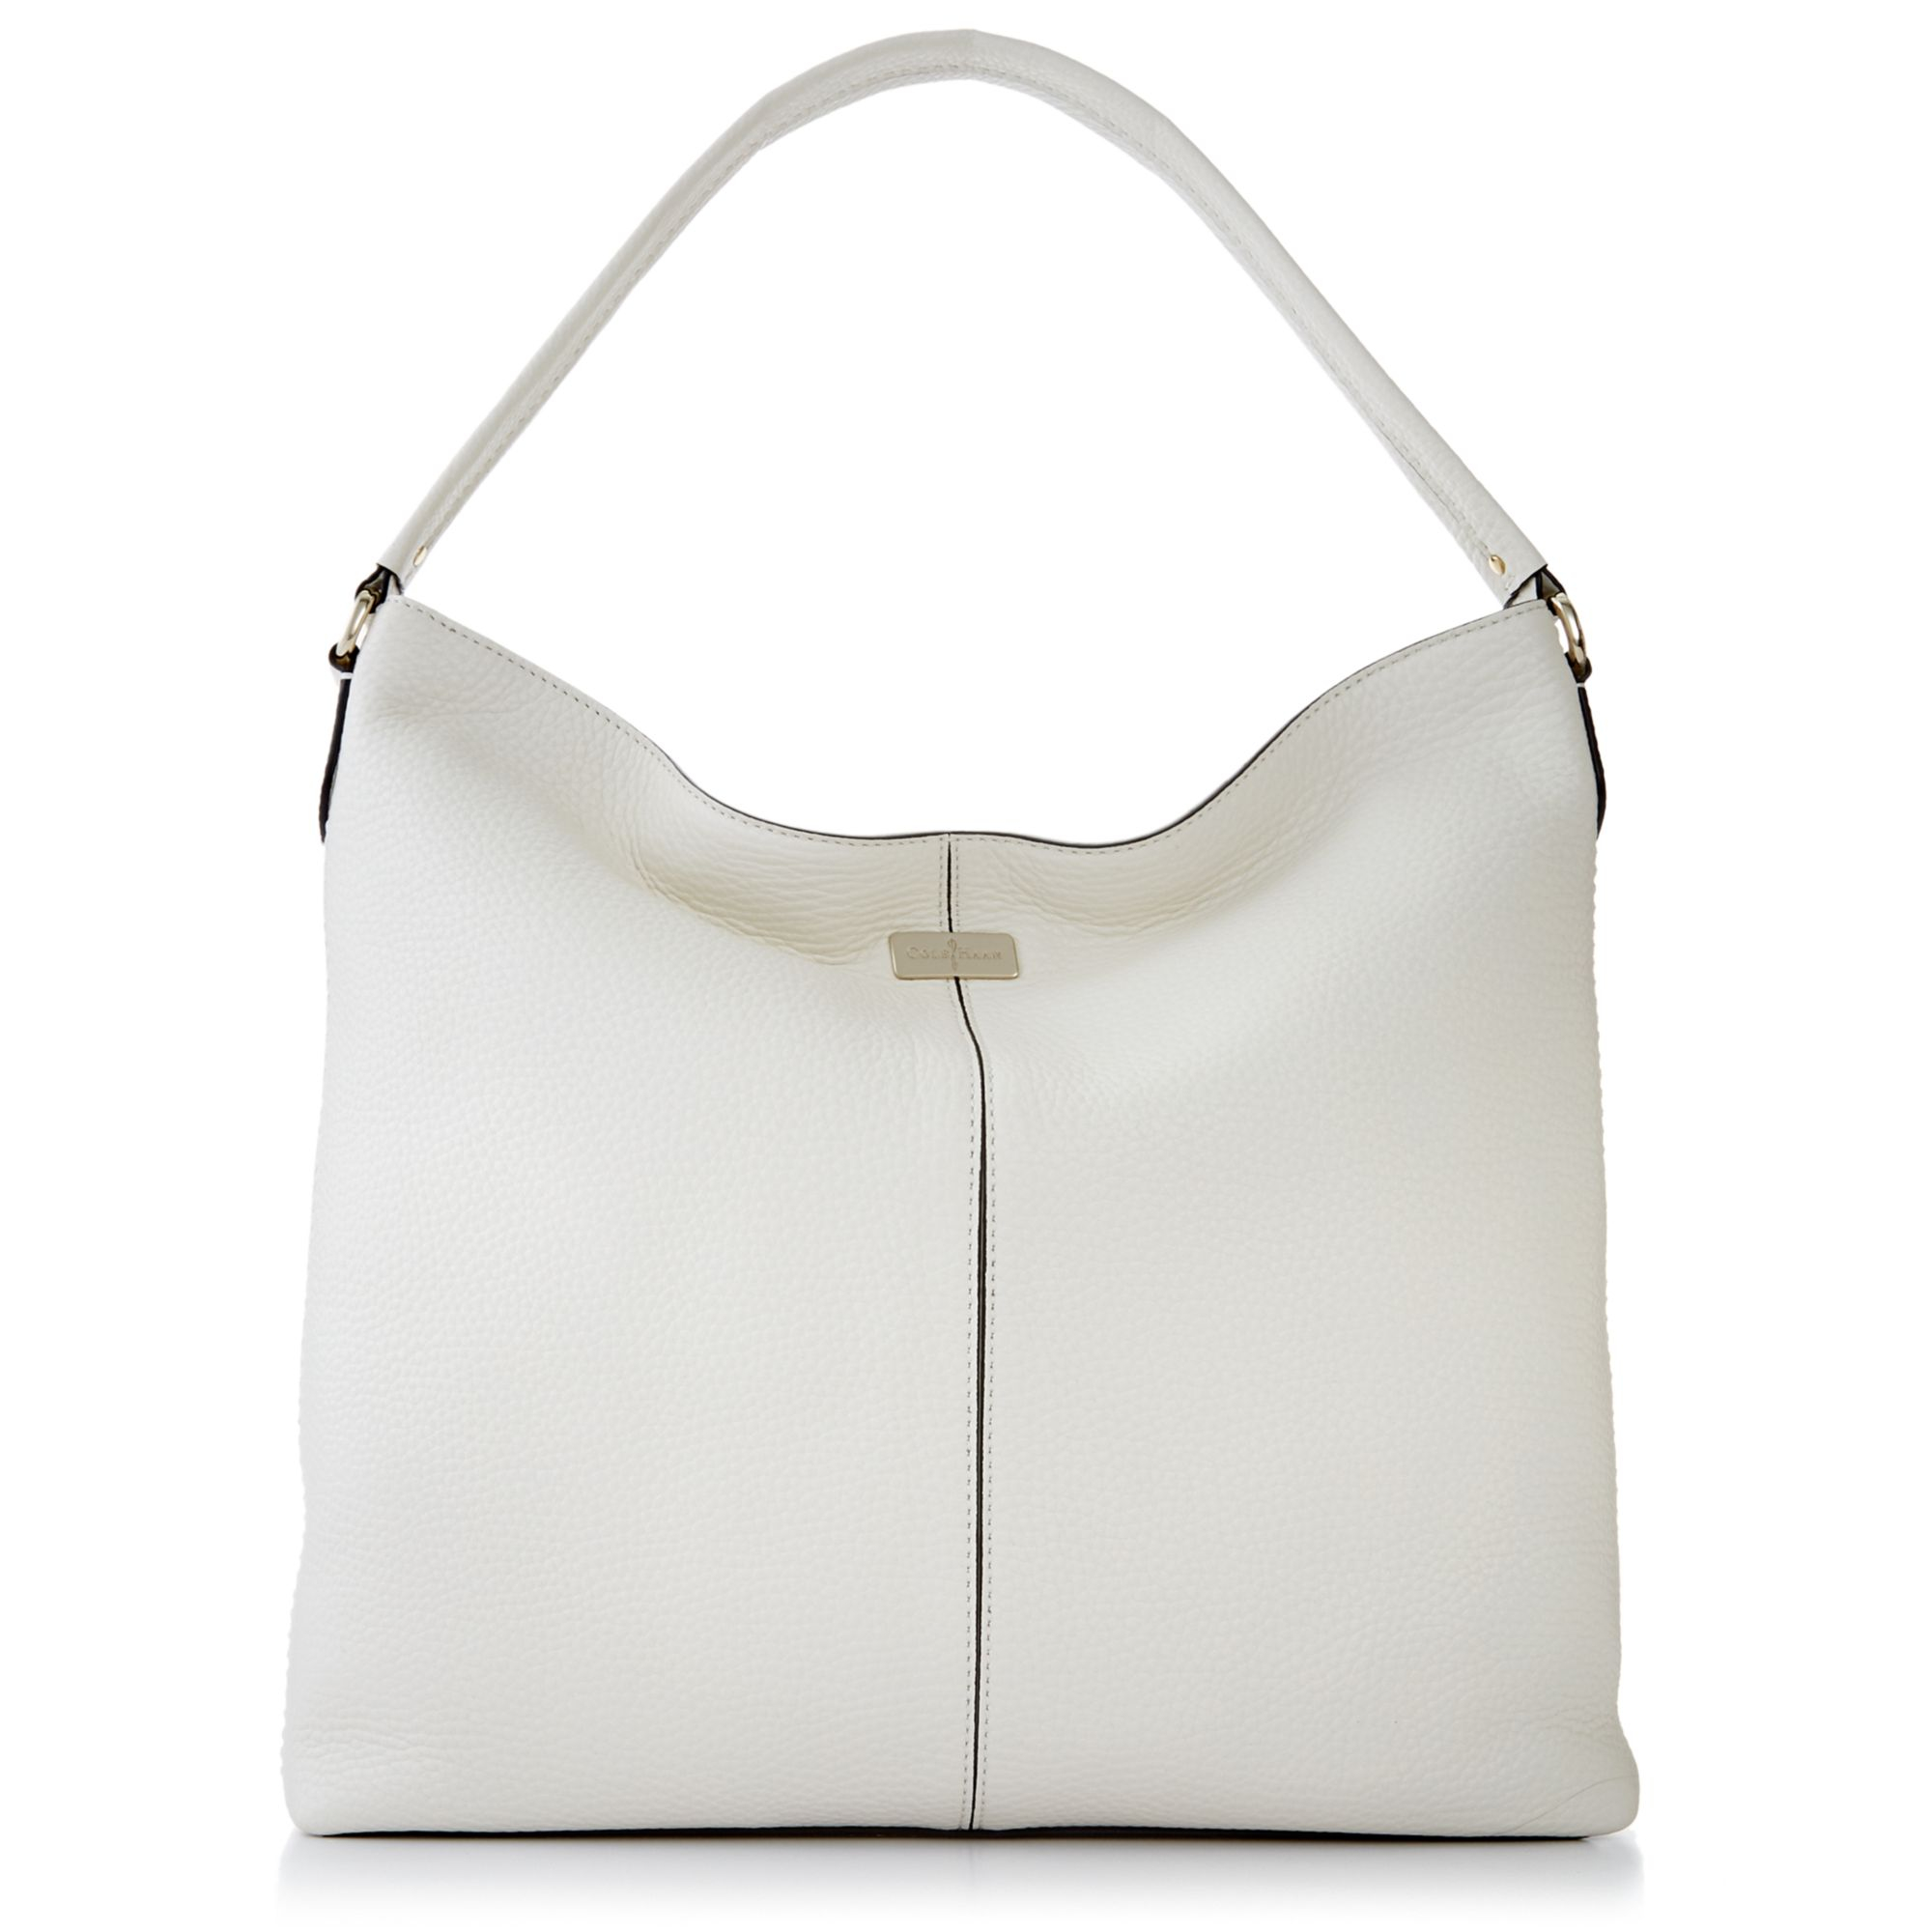 Lyst - Cole Haan Village Hobo in White